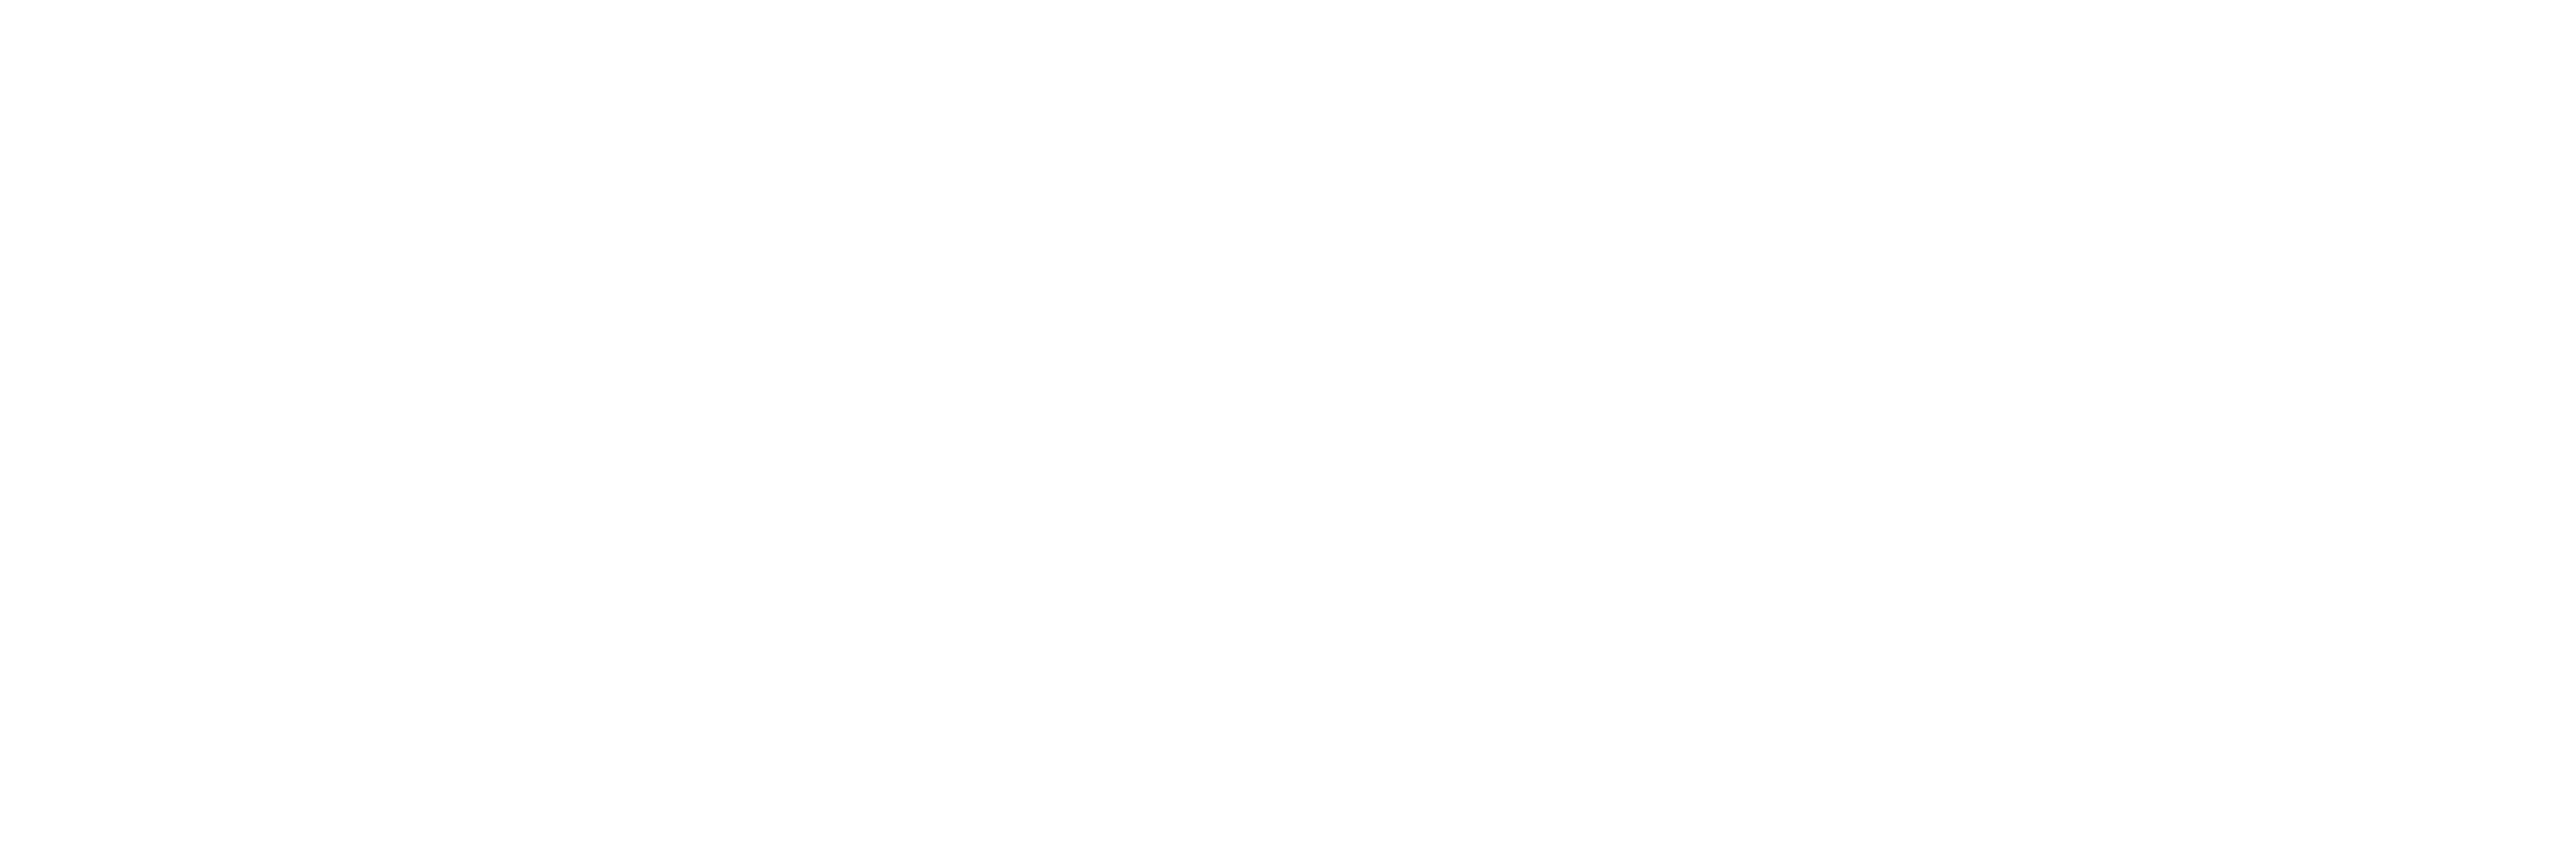 ALL Data Commons